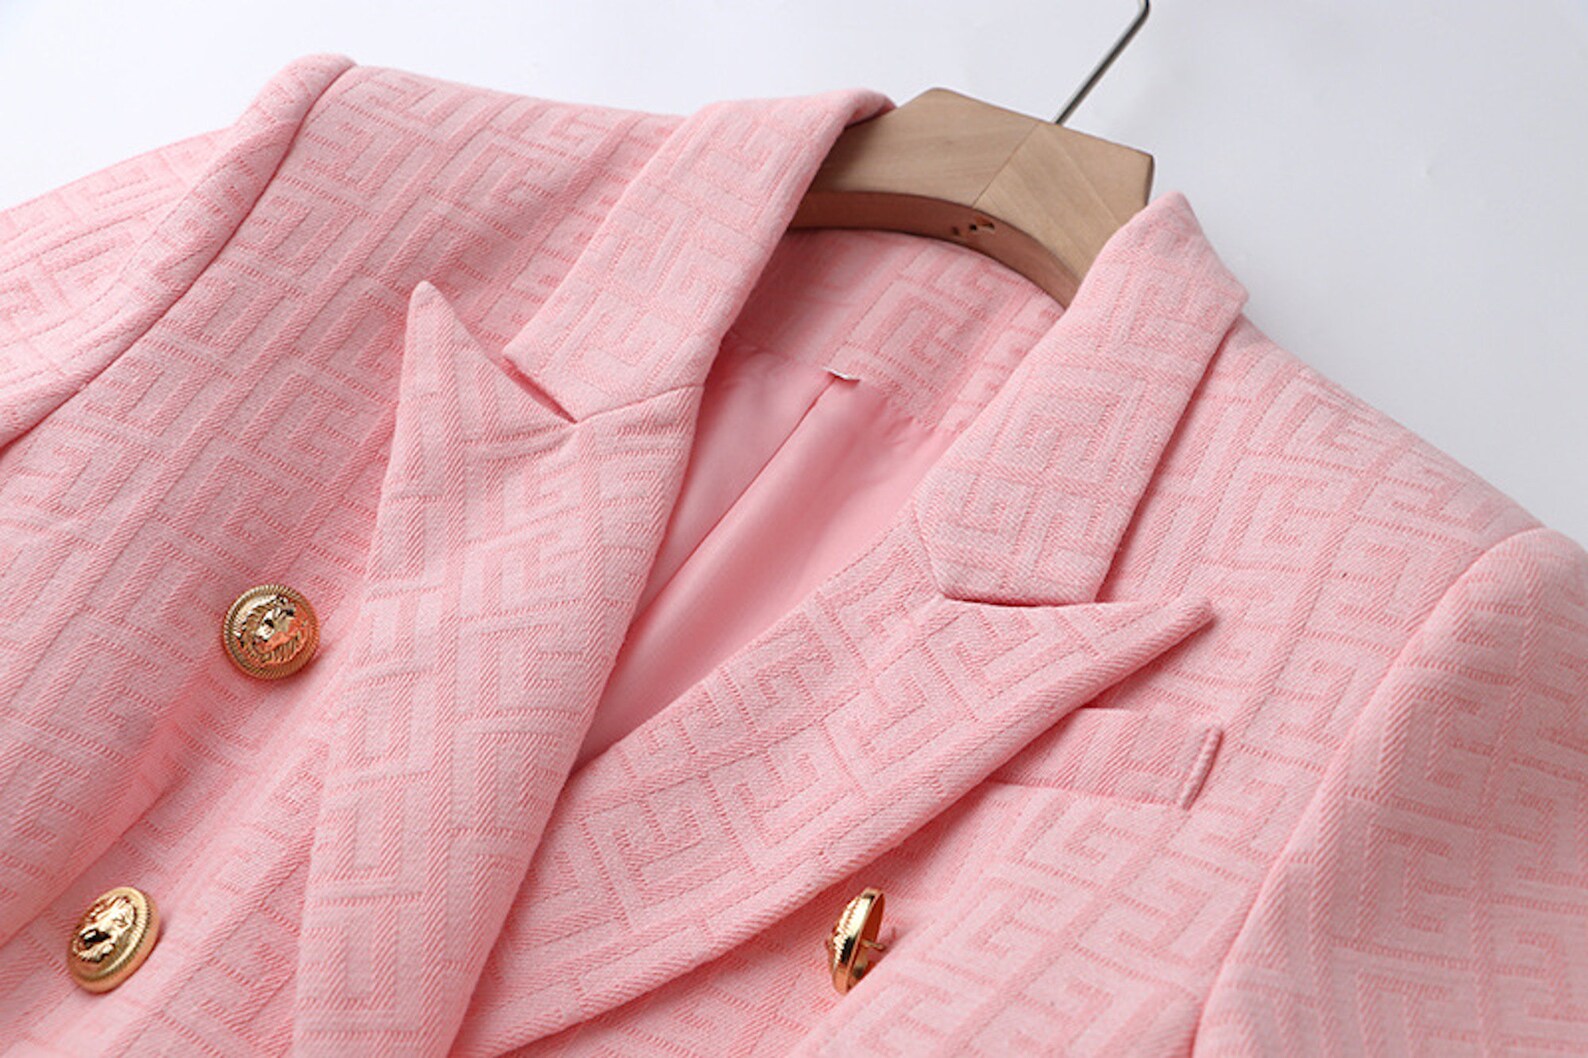 Pink Maze Pattern Fitted Blazer Jacket For Women  UK CUSTOMER SERVICE! Fashion Pioneer - A wardrobe must-have! Our blazer has rouched sleeves, faux pockets, and a lapel collar. For comfort and a flattering fit, this item is fully lined. Wear it open for a smart-casual look. Combine with jeans and sneakers or leggings and heels. Wearable from day to night, from the office to casual drinks.